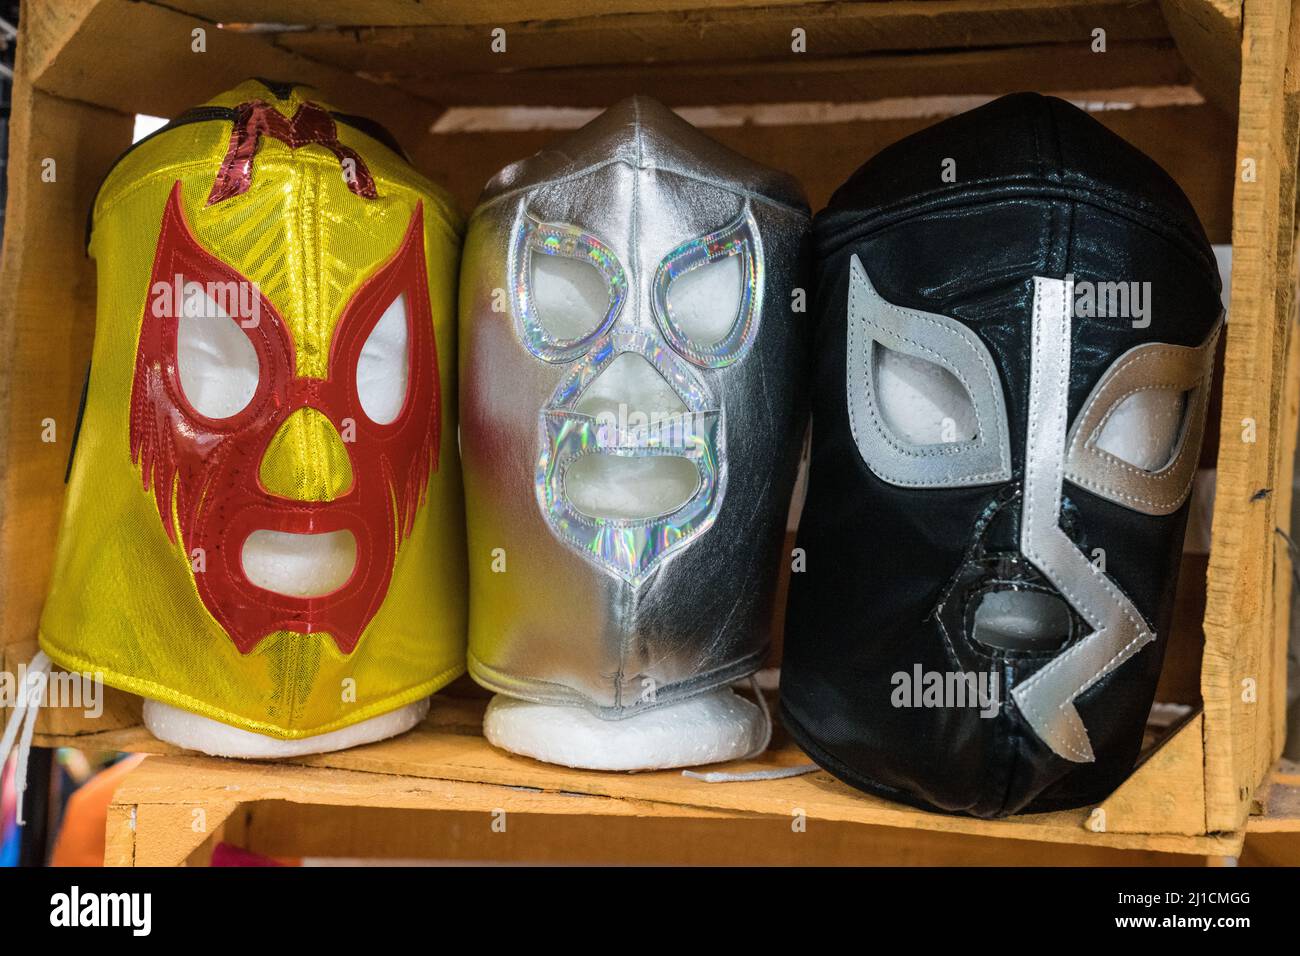 Lucha libre wrestling masks of three famous Mexican wrestlers for sale in a market in Brownsville, Texas. Stock Photo